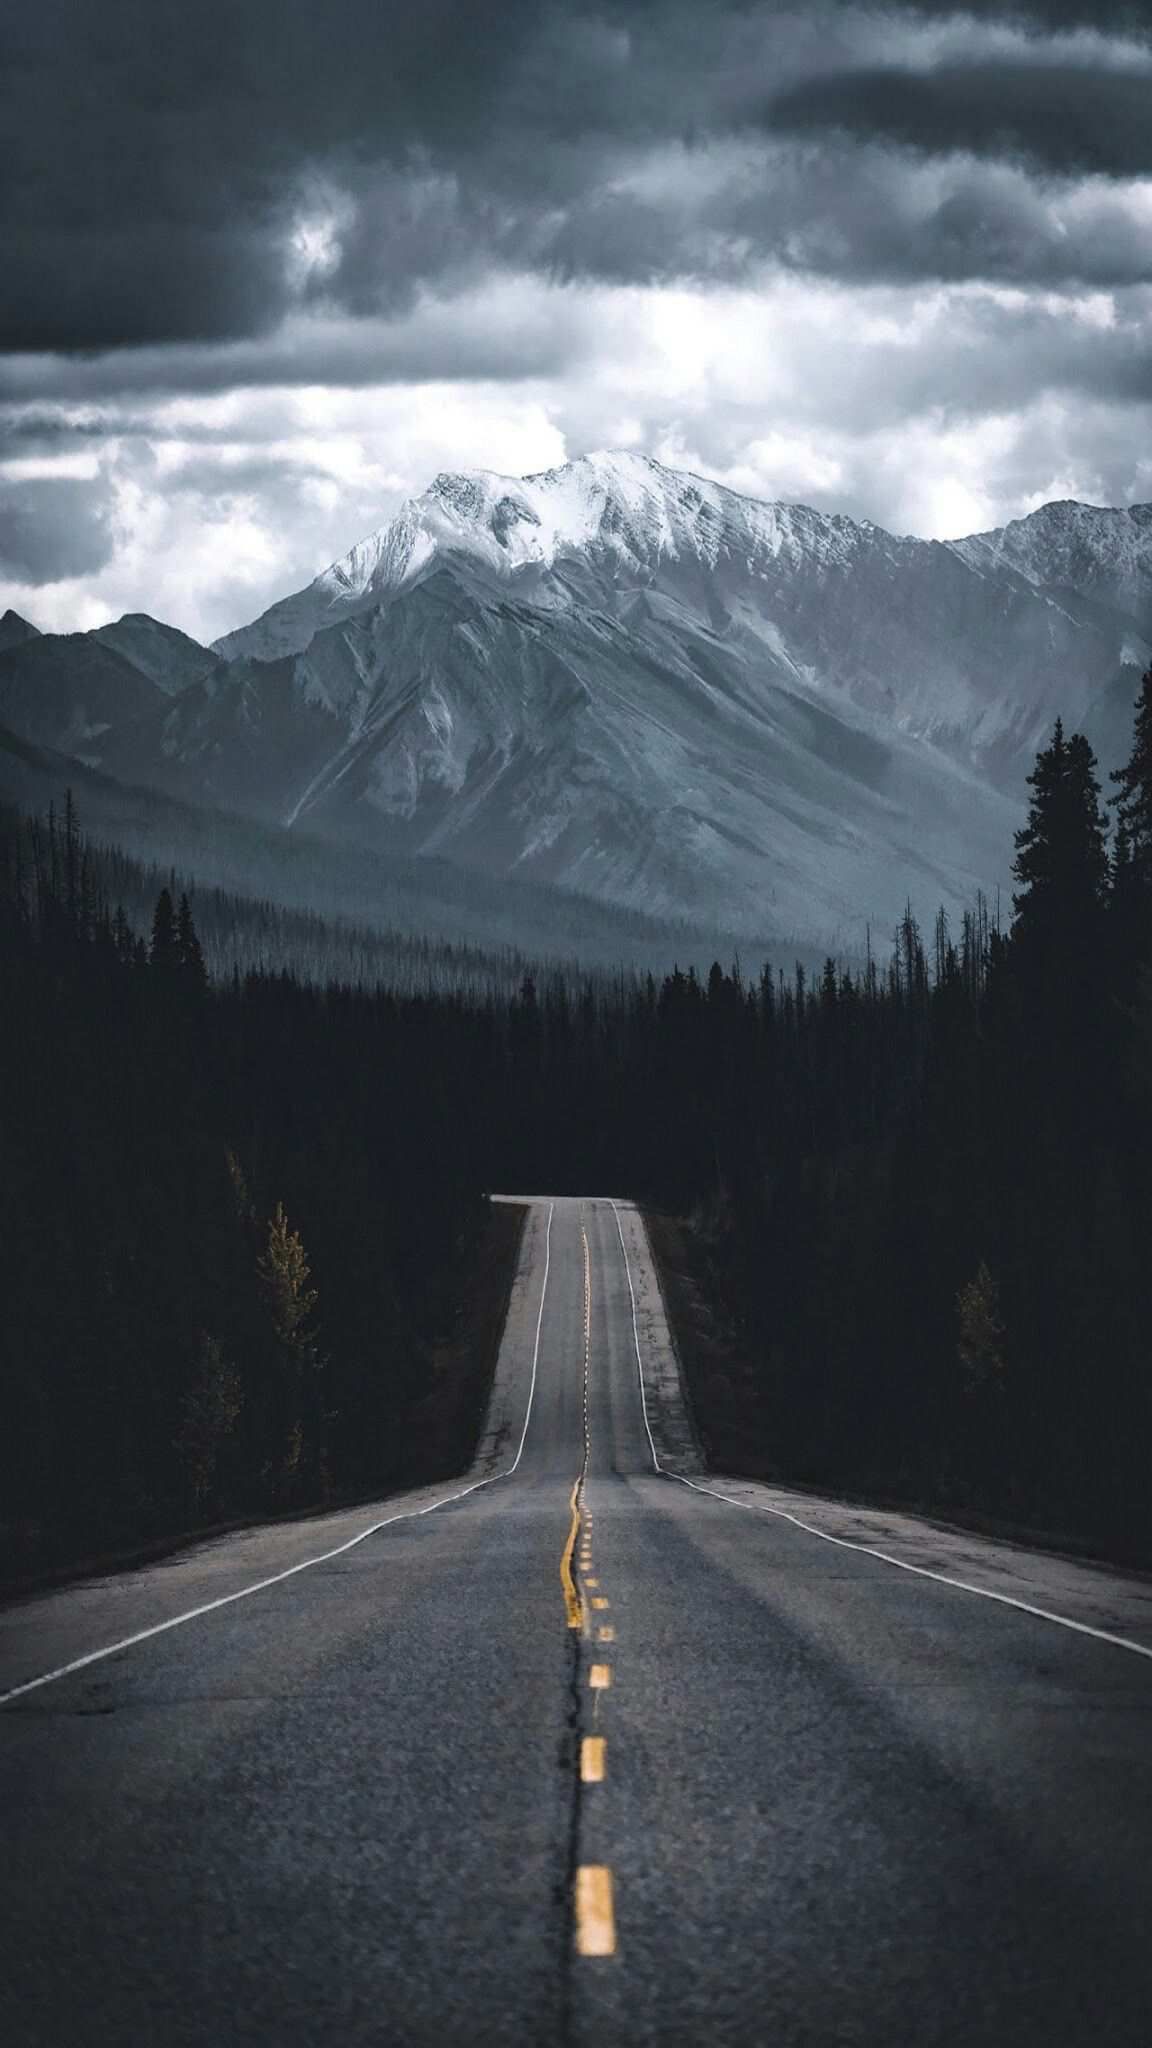 Road to Mountain Nature iPhone Wallpaper. Landscape photography, Nature photography, Photography wallpaper